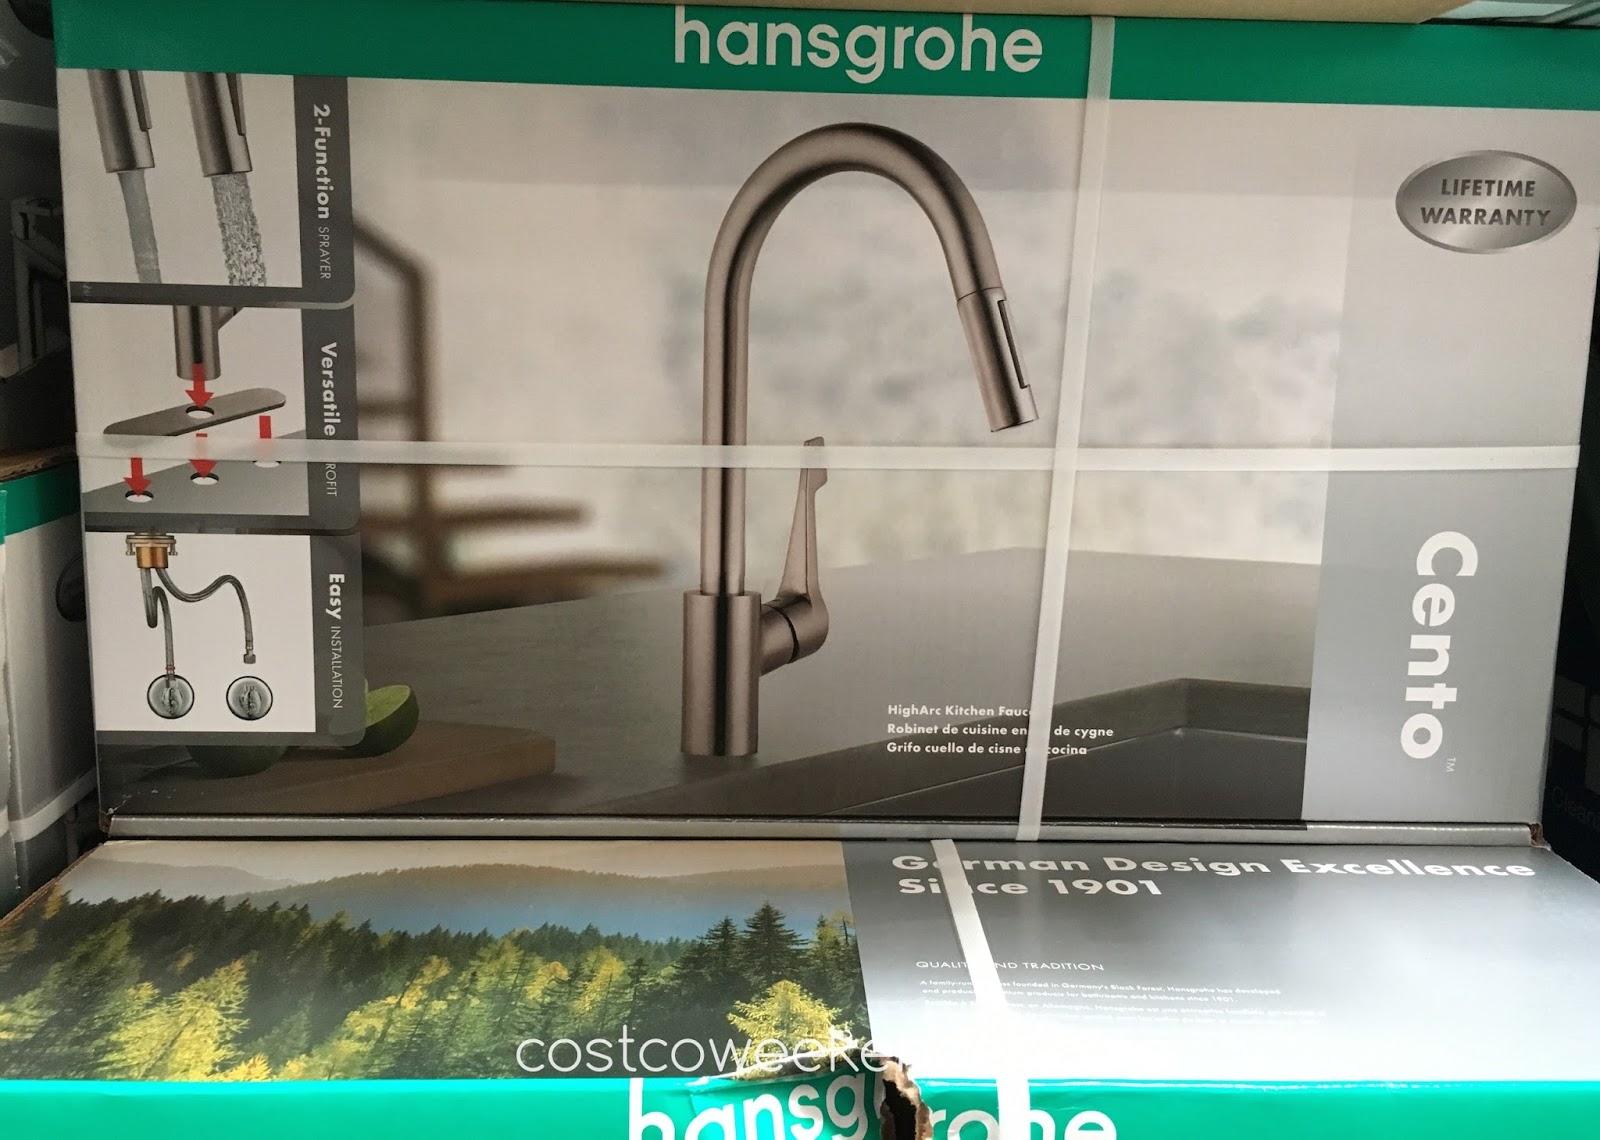 Hansgrohe Cento Higharc Kitchen Faucet Costco Weekender